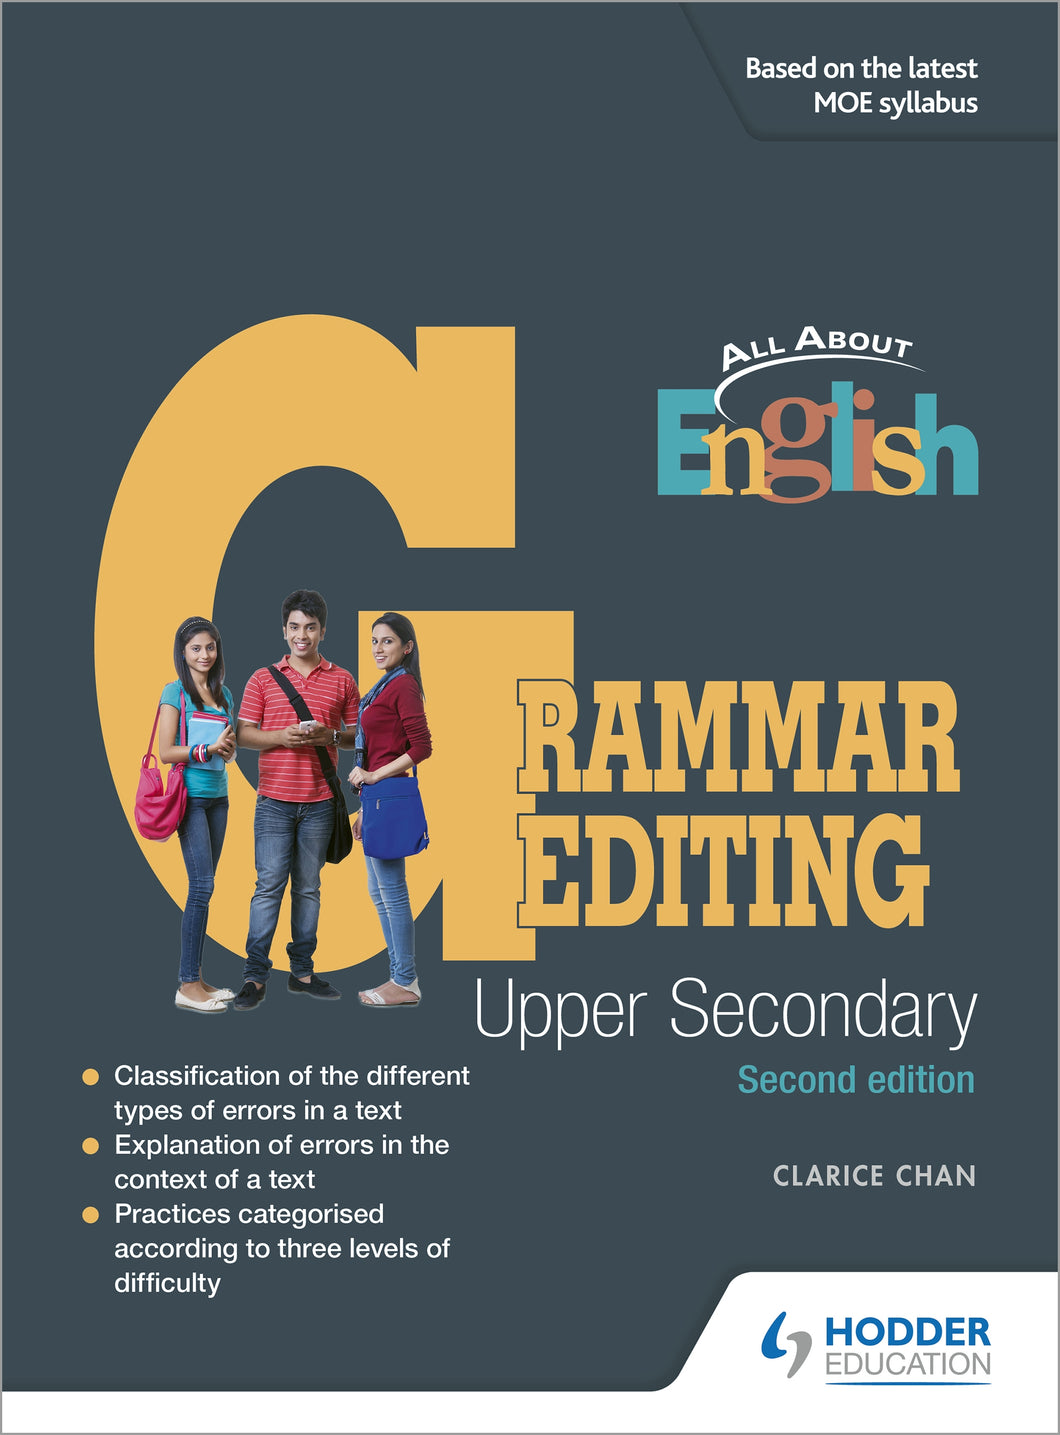 KRSS - English - All About English Grammar Editing for Upper Sec. for Sec. 3 Express